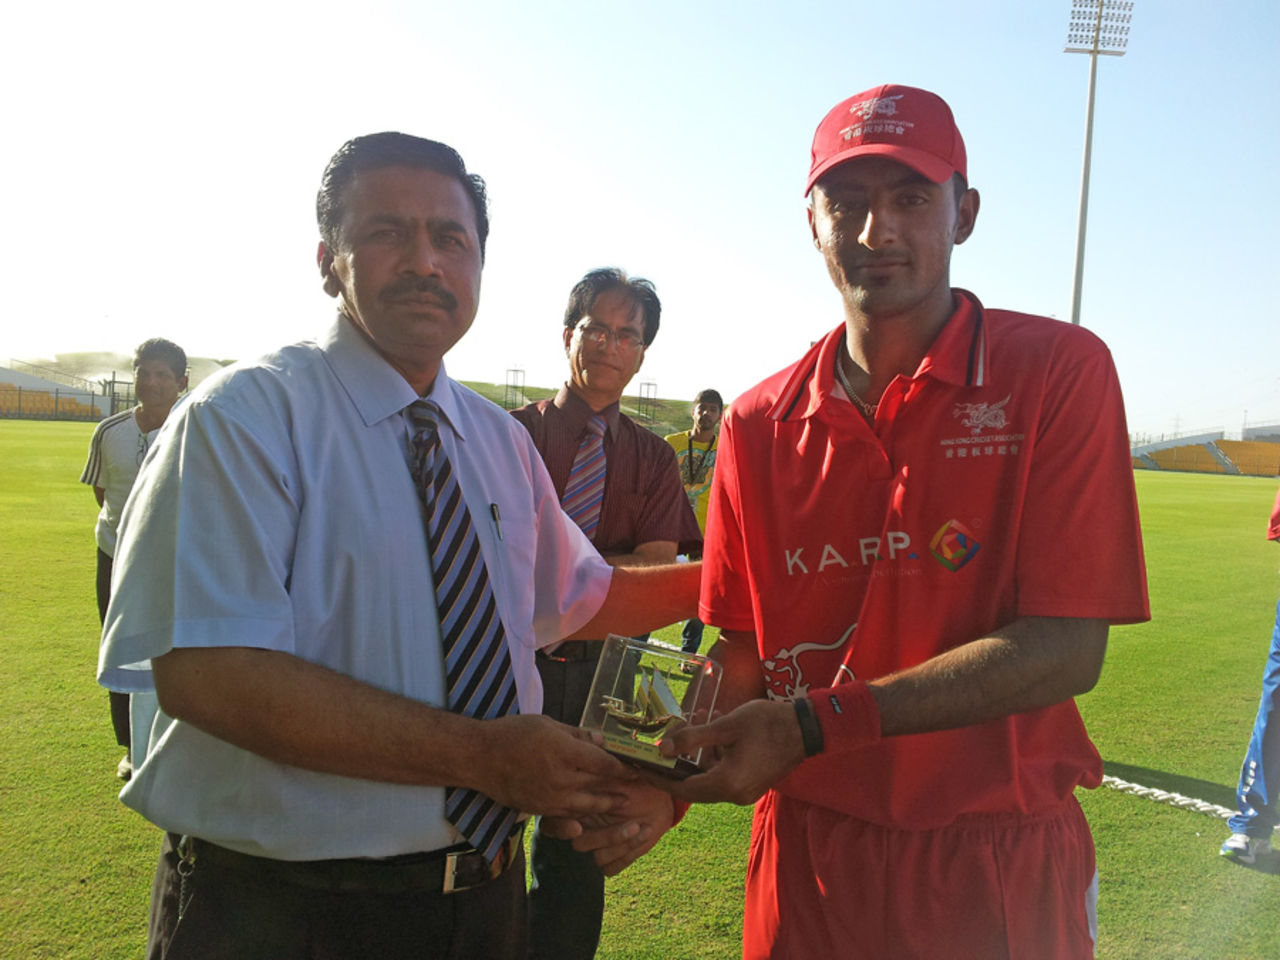 Hong Kong's Nizakat Khan receives his second Man of the Match award after scoring 33 and claiming 3-35 against Kuwait at the ACC Trophy Elite 2012 in Abu Dhabi